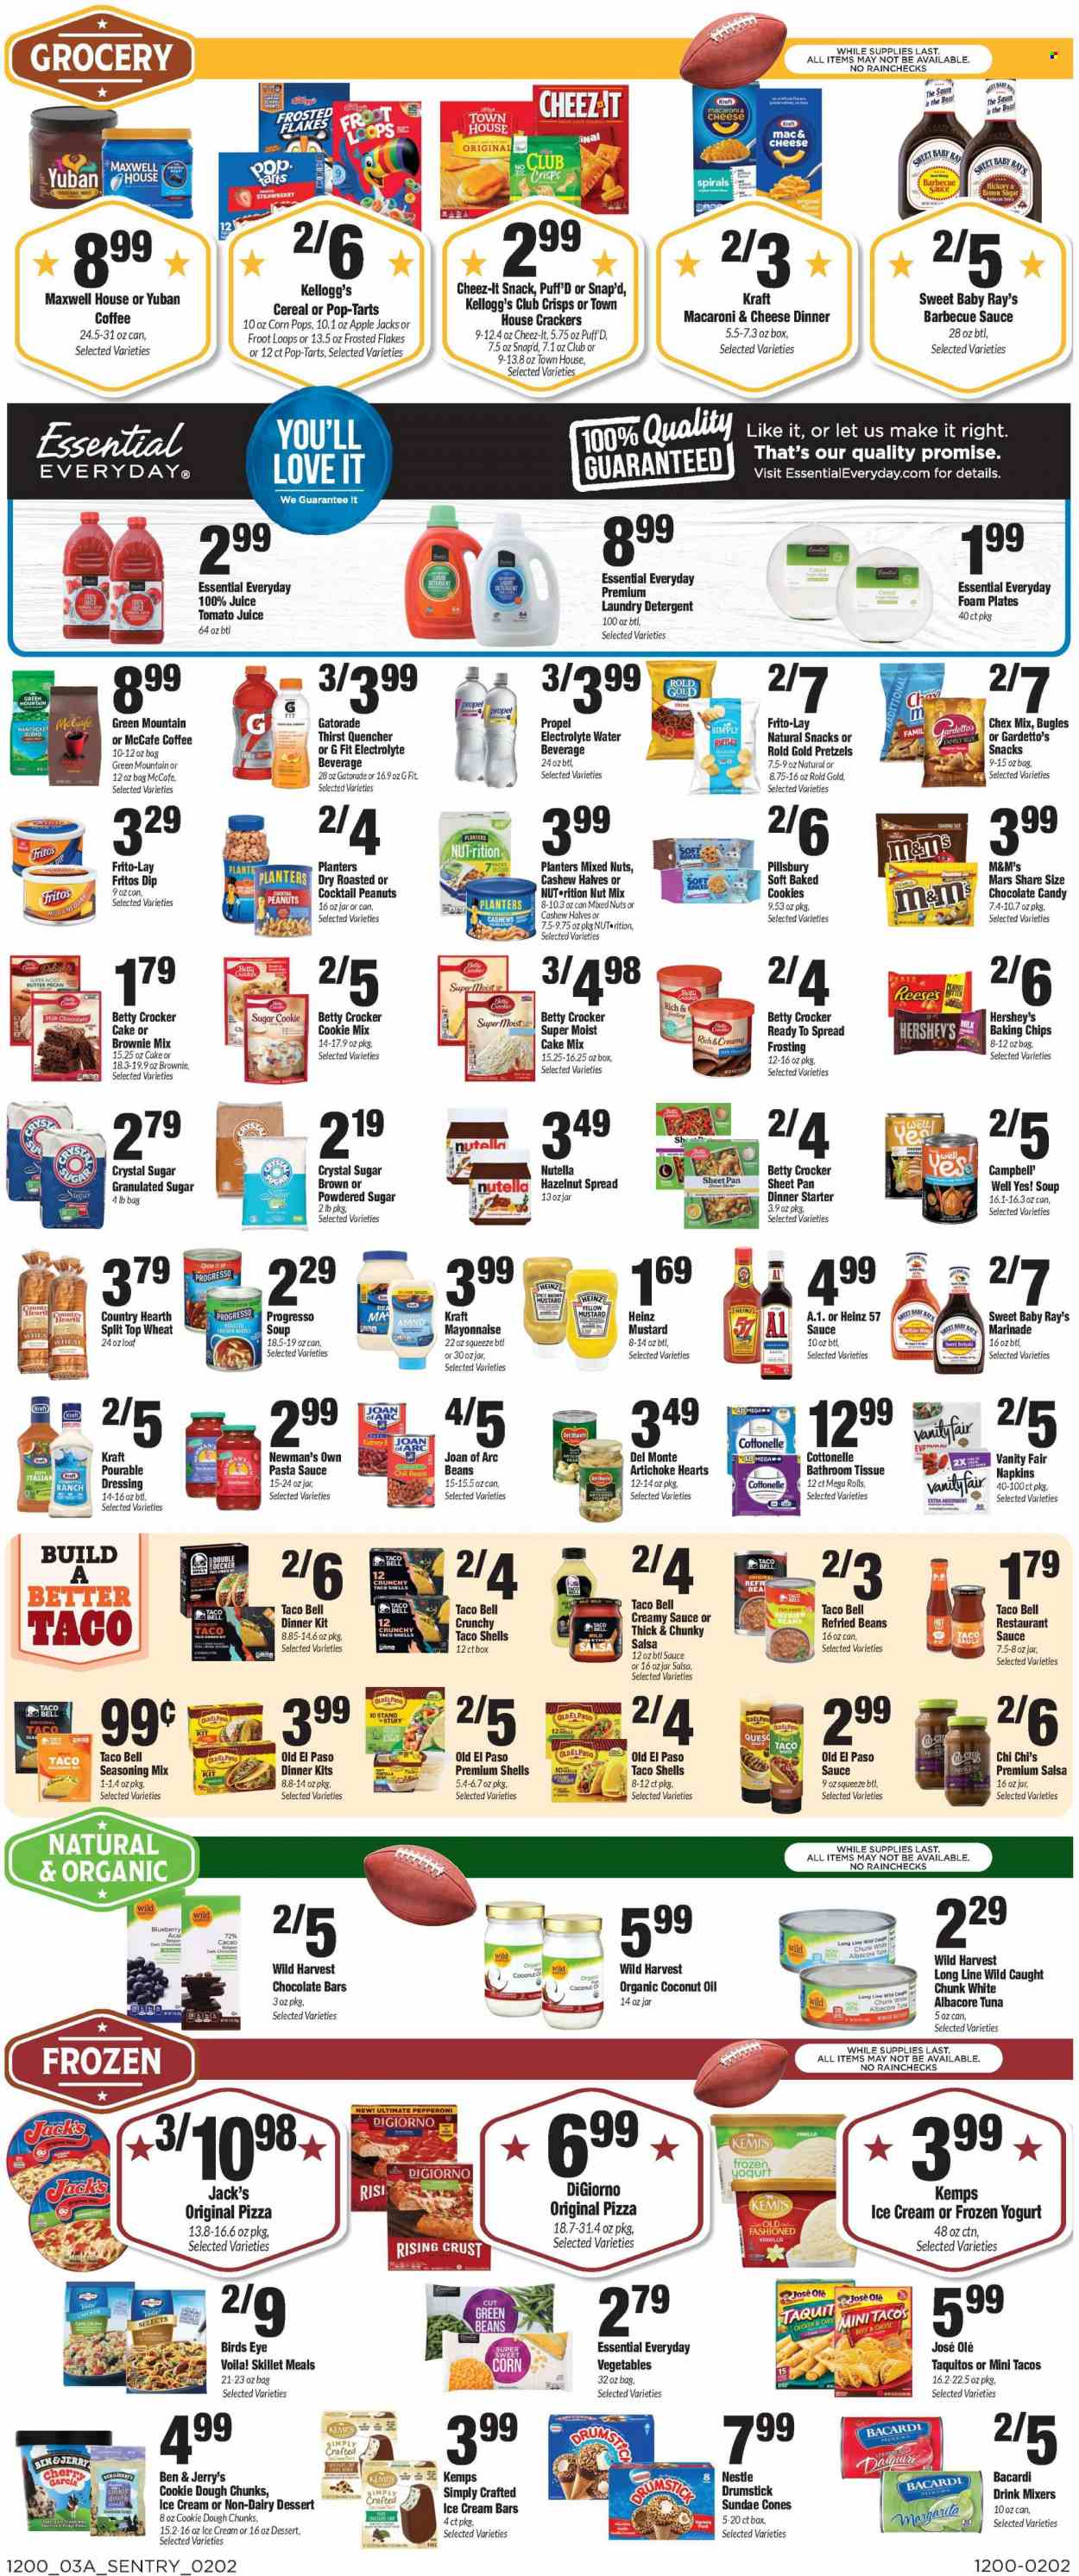 thumbnail - Sentry Foods Flyer - 02/02/2023 - 02/08/2023 - Sales products - tortillas, pretzels, Old El Paso, brownie mix, cake mix, artichoke, garlic, green beans, sweet corn, Wild Harvest, tuna, pizza, chicken roast, pasta sauce, Pillsbury, Bird's Eye, dinner kit, noodles, Progresso, taquitos, Kraft®, sausage, pepperoni, Kemps, yoghurt, mayonnaise, dip, filo dough, ice cream, ice cream bars, Reese's, Hershey's, Ben & Jerry's, cookie dough, fudge, milk chocolate, Nestlé, Nutella, snack, Mars, M&M's, crackers, Kellogg's, dark chocolate, Pop-Tarts, chocolate candies, chocolate bar, Fritos, Thins, Frito-Lay, Cheez-It, Chex Mix, crystal sugar, frosting, granulated sugar, icing sugar, baking chips, refried beans, Heinz, chili beans, Del Monte, cereals, Frosted Flakes, Corn Pops, spice, BBQ sauce, mustard, taco sauce, dressing, salsa, marinade, coconut oil, oil, hazelnut spread, cashews, peanuts, mixed nuts, Planters, tomato juice, juice, Gatorade, Maxwell House, coffee, McCafe, Green Mountain, Bacardi, napkins, bath tissue, Cottonelle, detergent, liquid detergent, laundry detergent. Page 3.